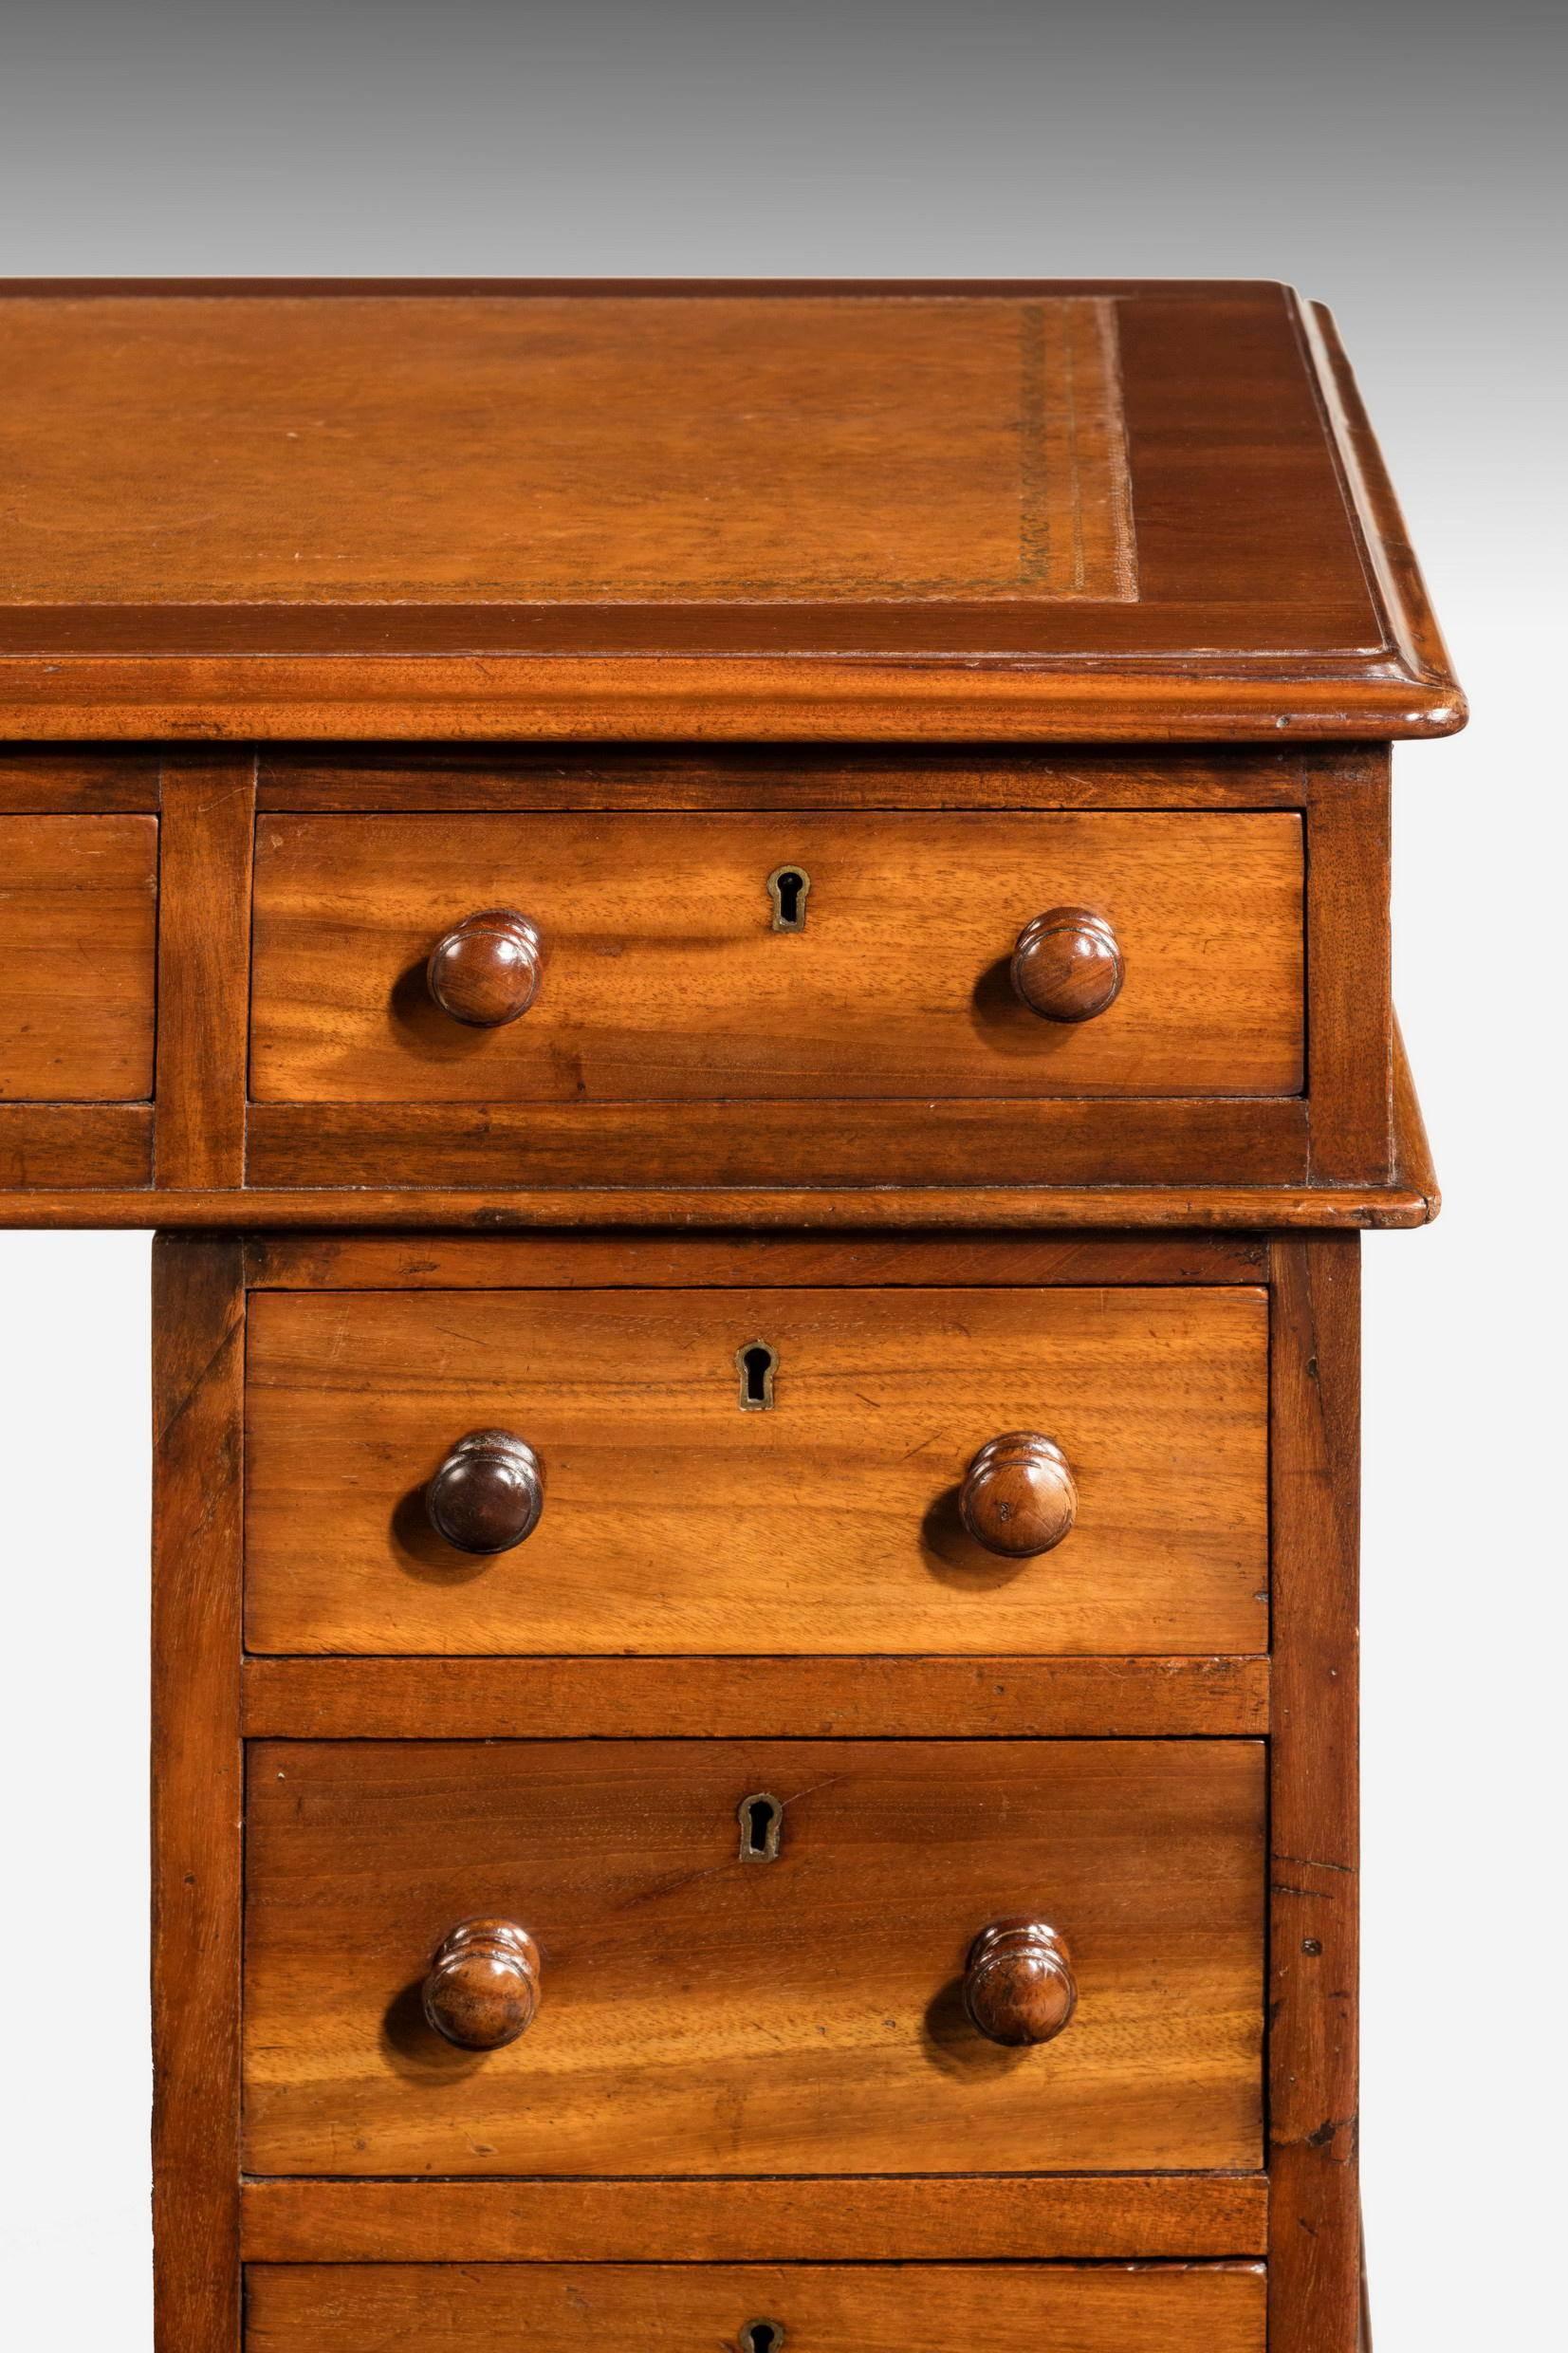 Late 19th Century Mahogany Pedestal Desk In Excellent Condition In Peterborough, Northamptonshire